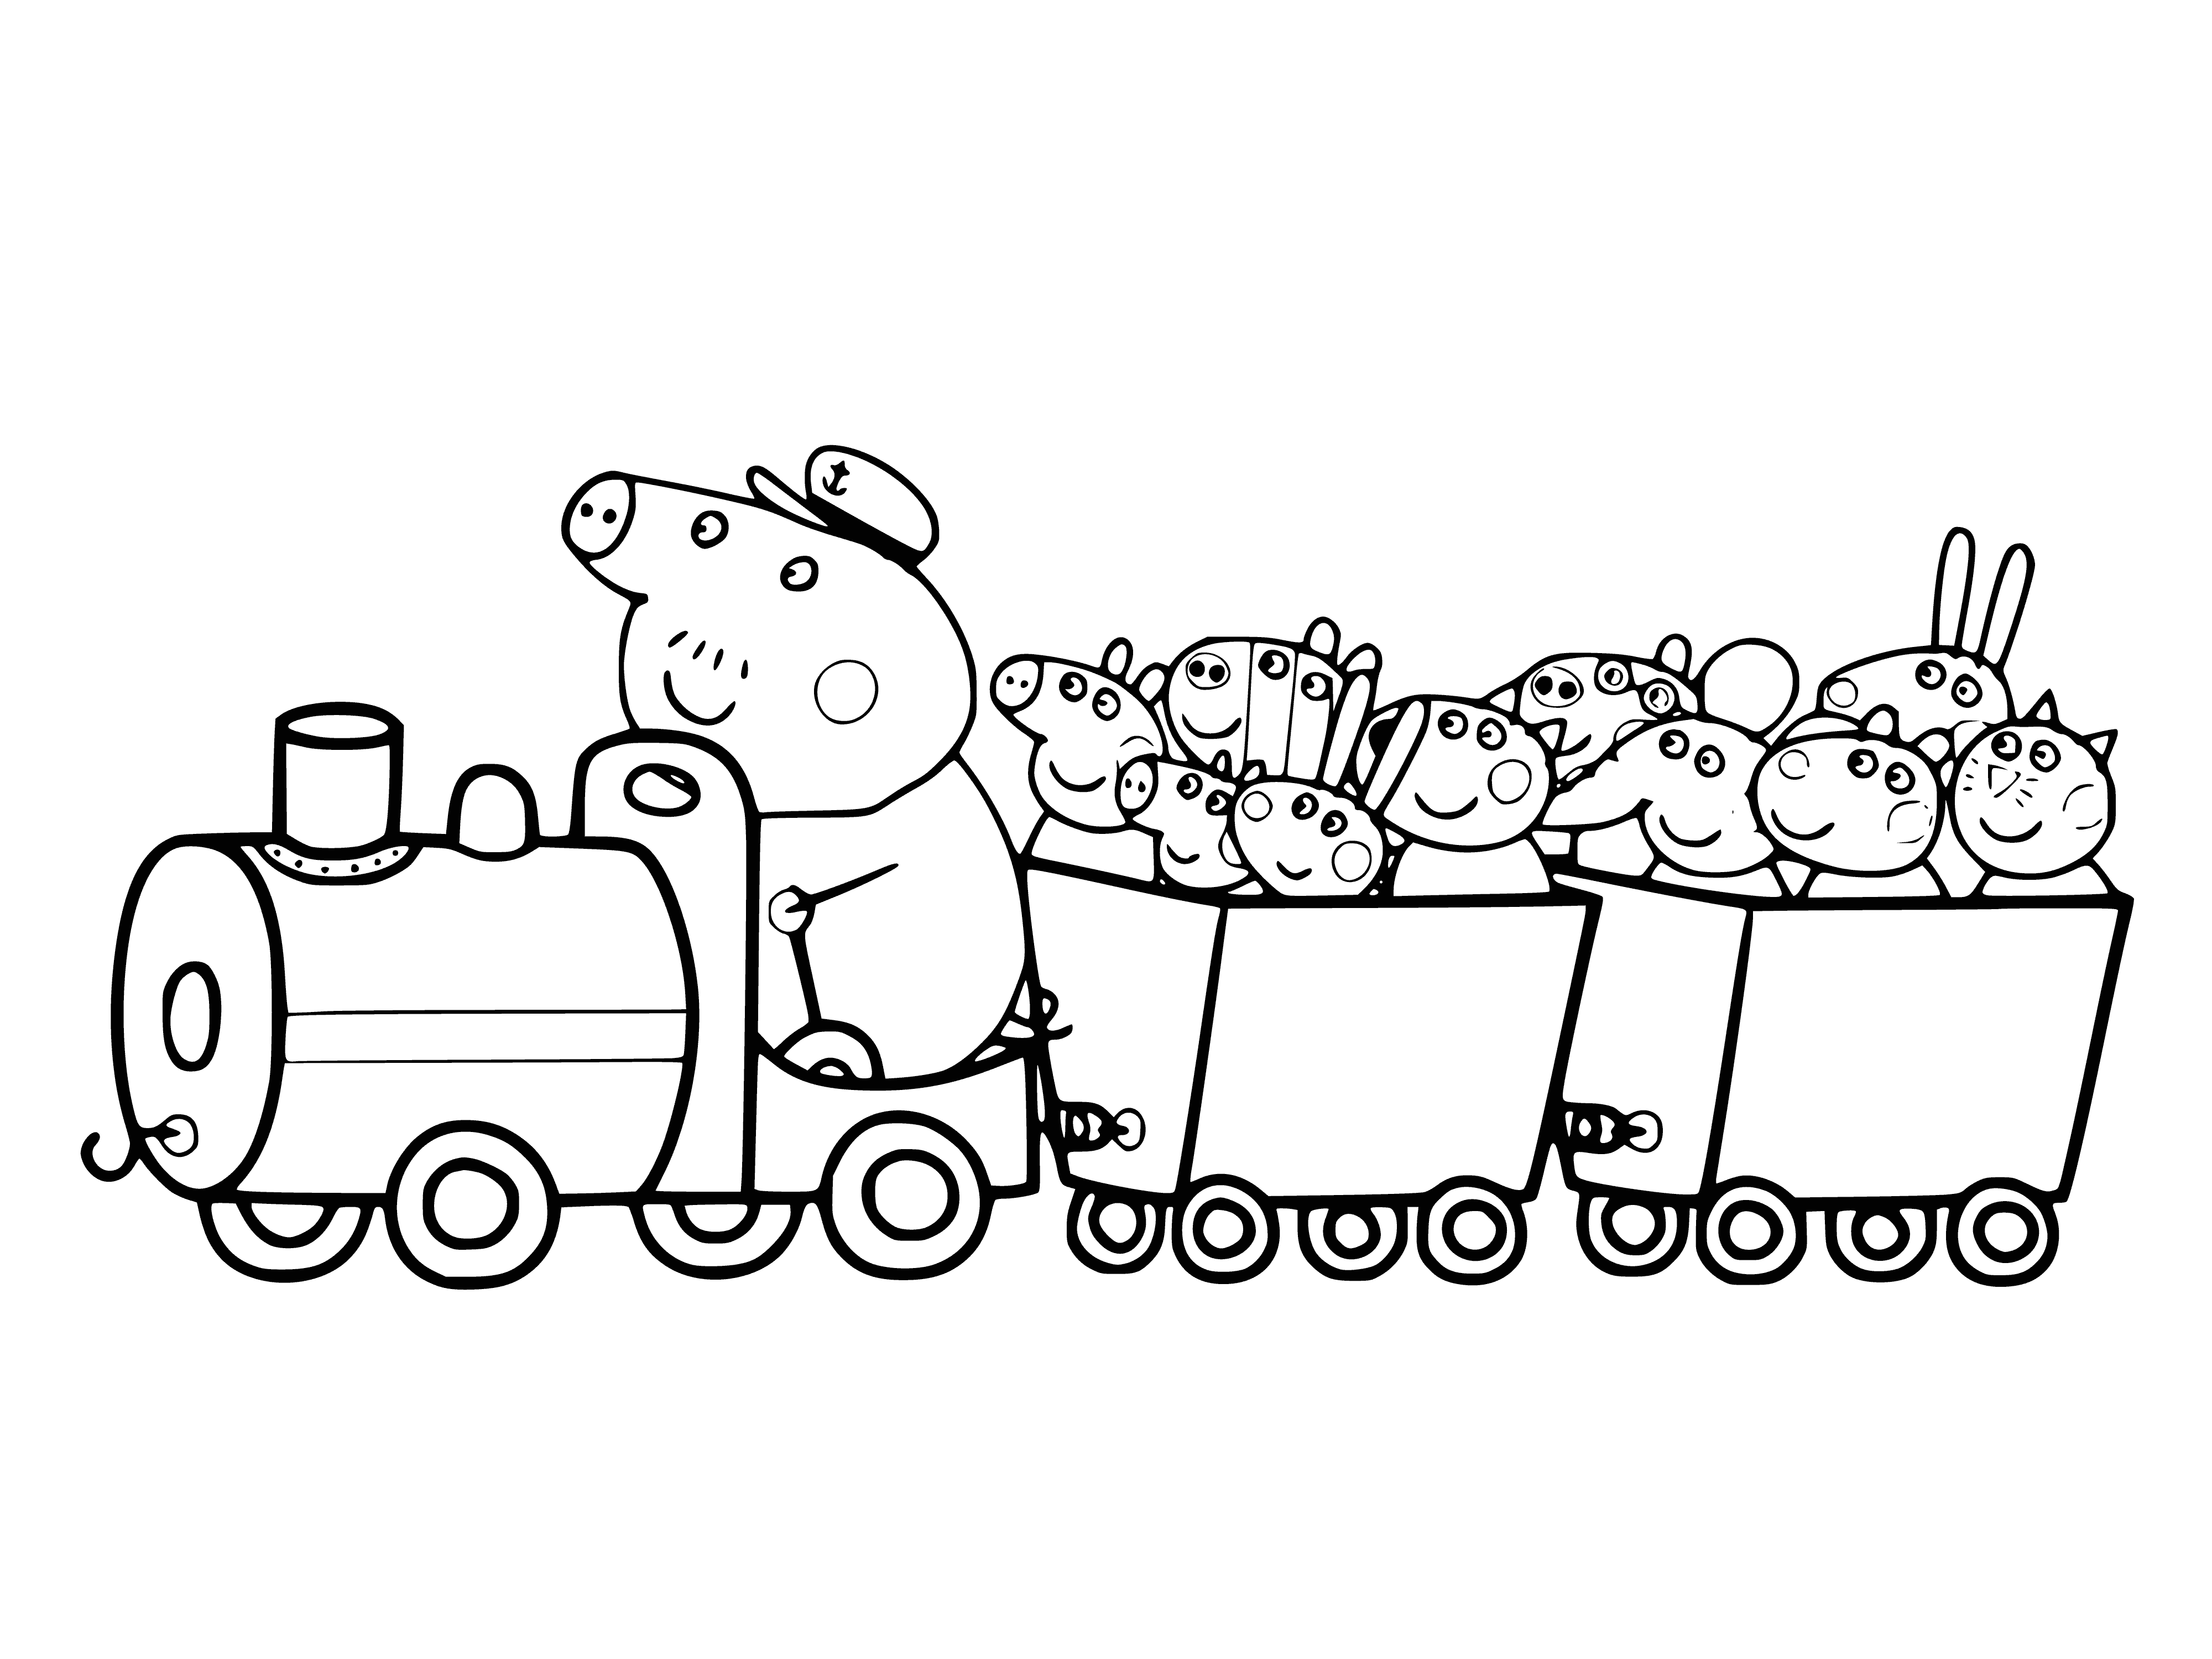 Grandpa Pig Rides Children on a Steam Train coloring page